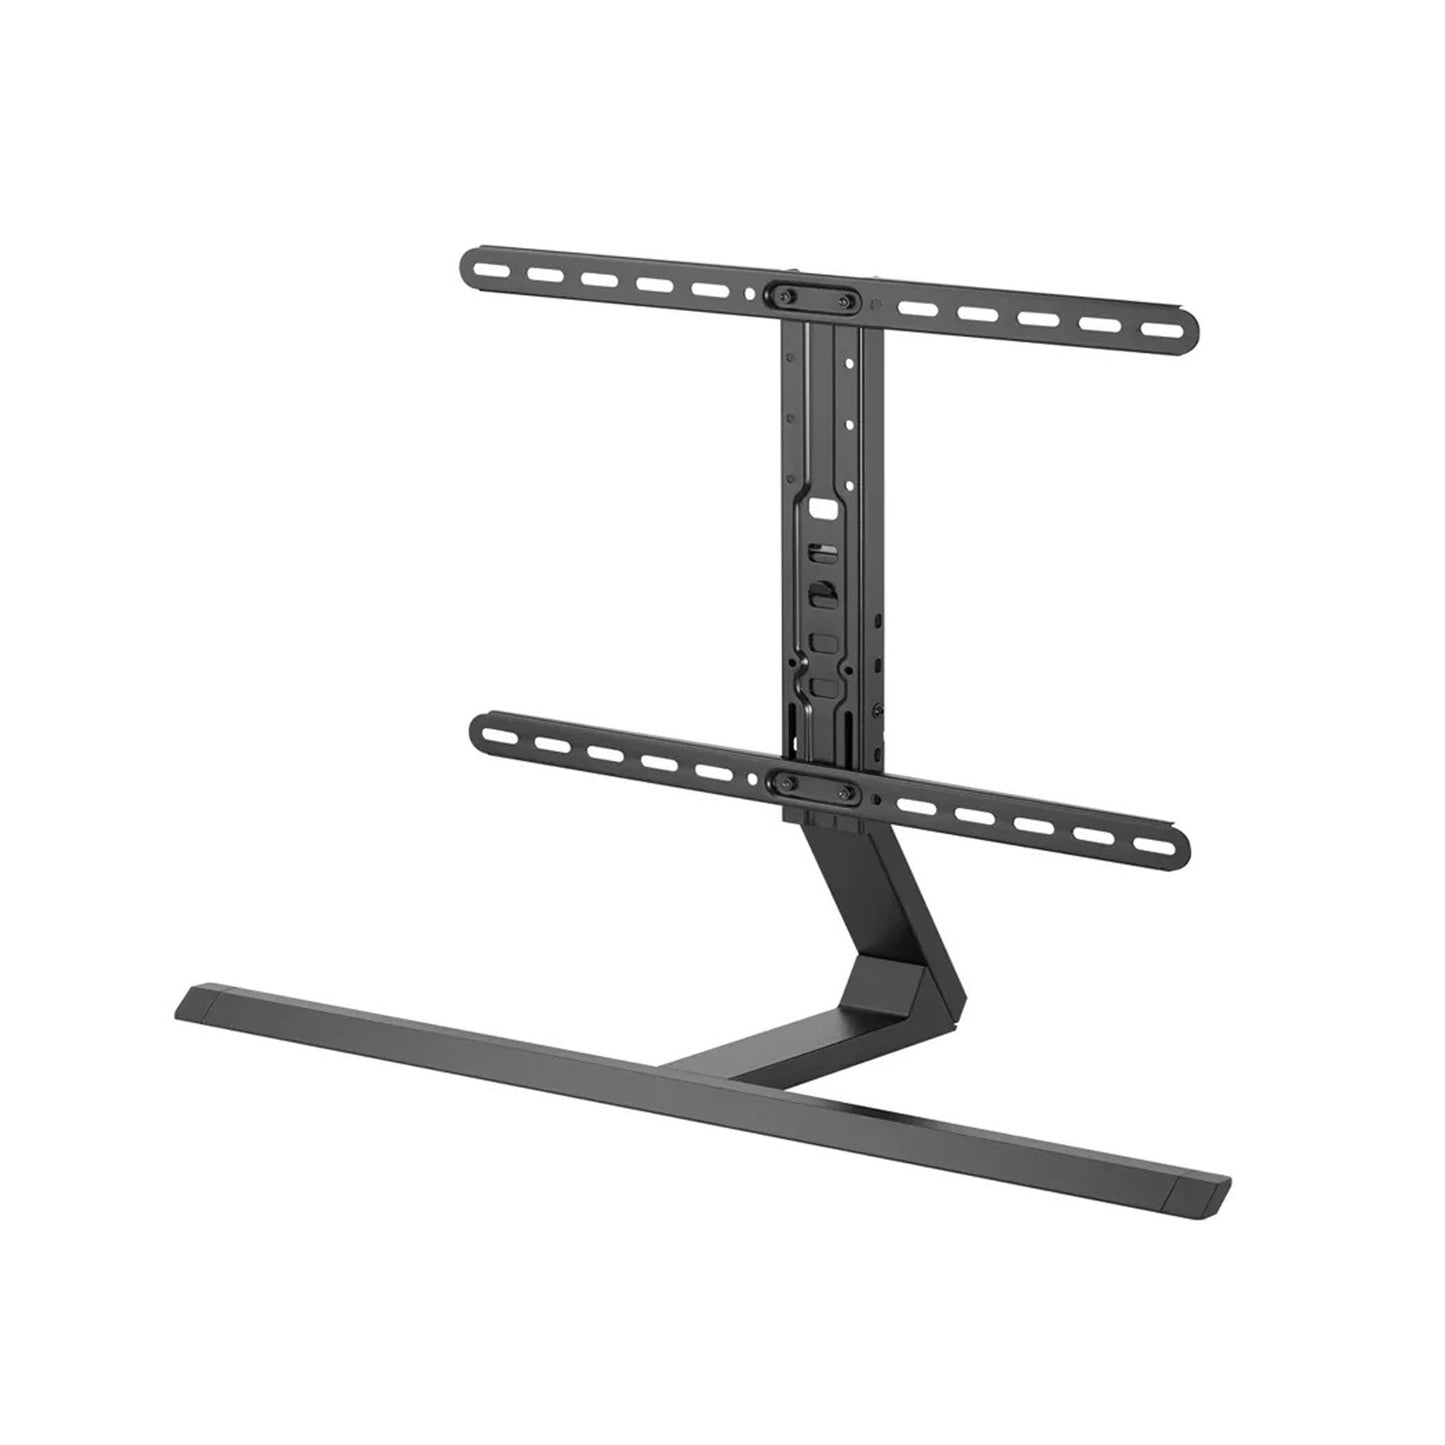 37 inch - 86 inch Contemporary Aluminum Pedestal Tabletop TV Stand, SH-4275B